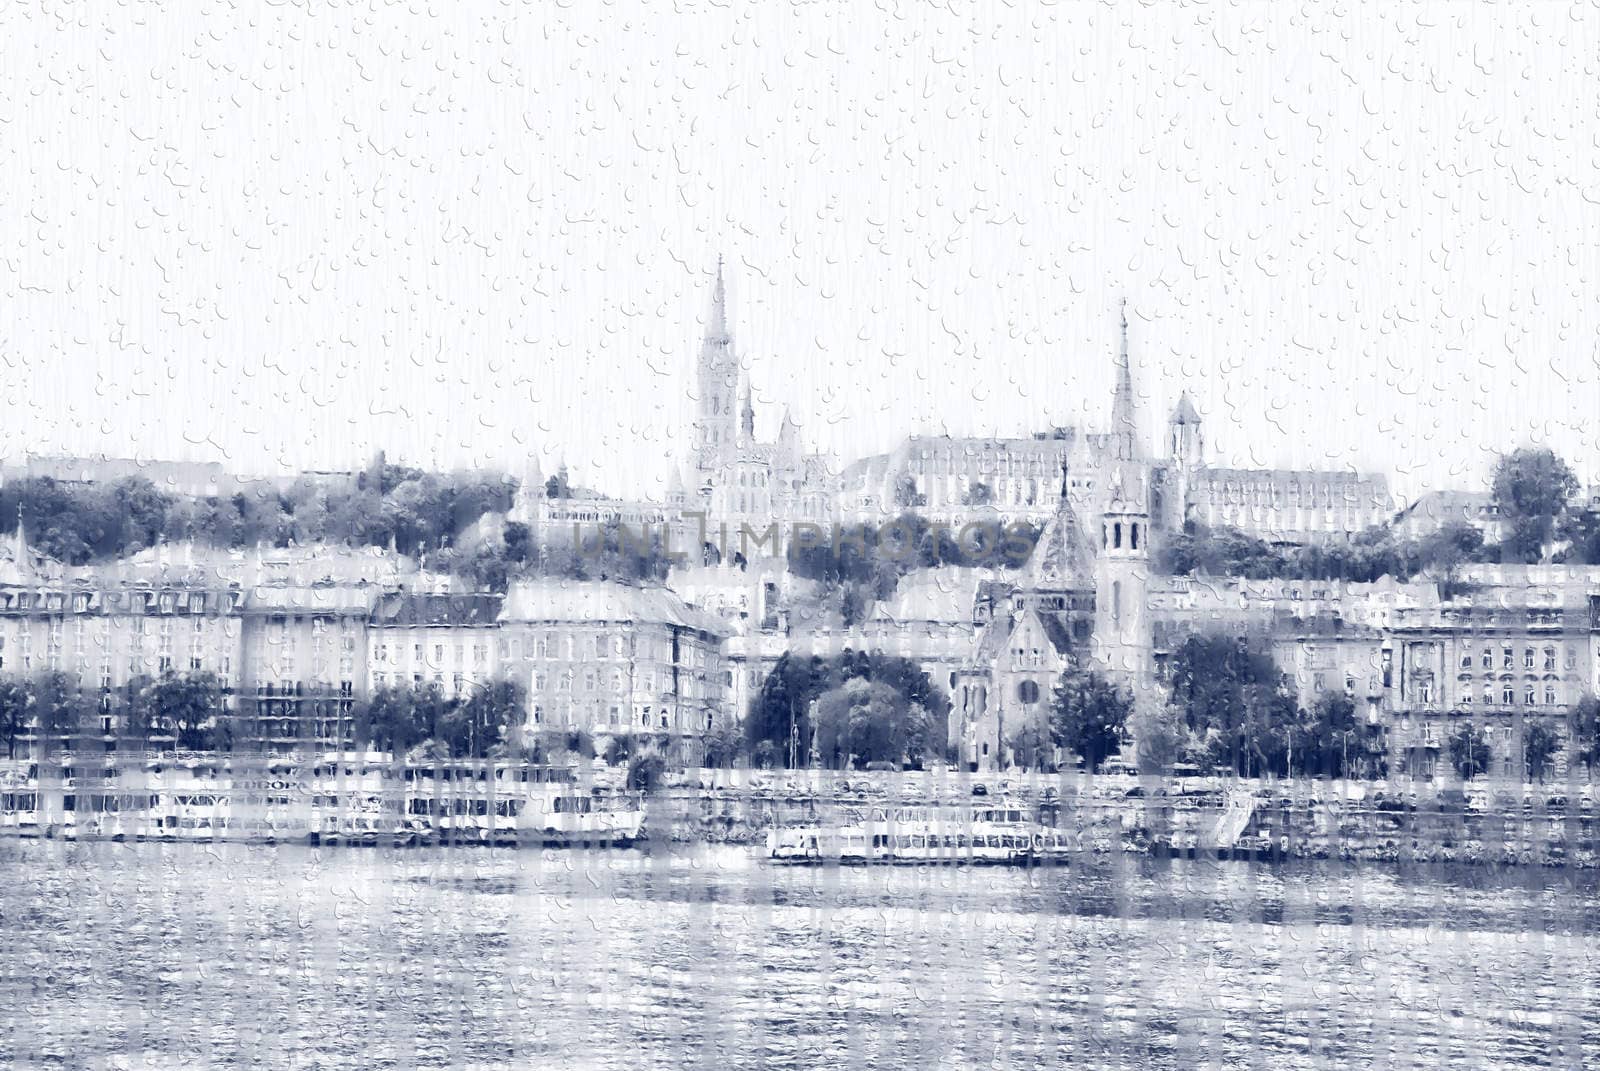 View  Buda side of Budapest with the Buda Castle, St. Matthias and Fishermen's Bastion in the heavy rain. Vintage style